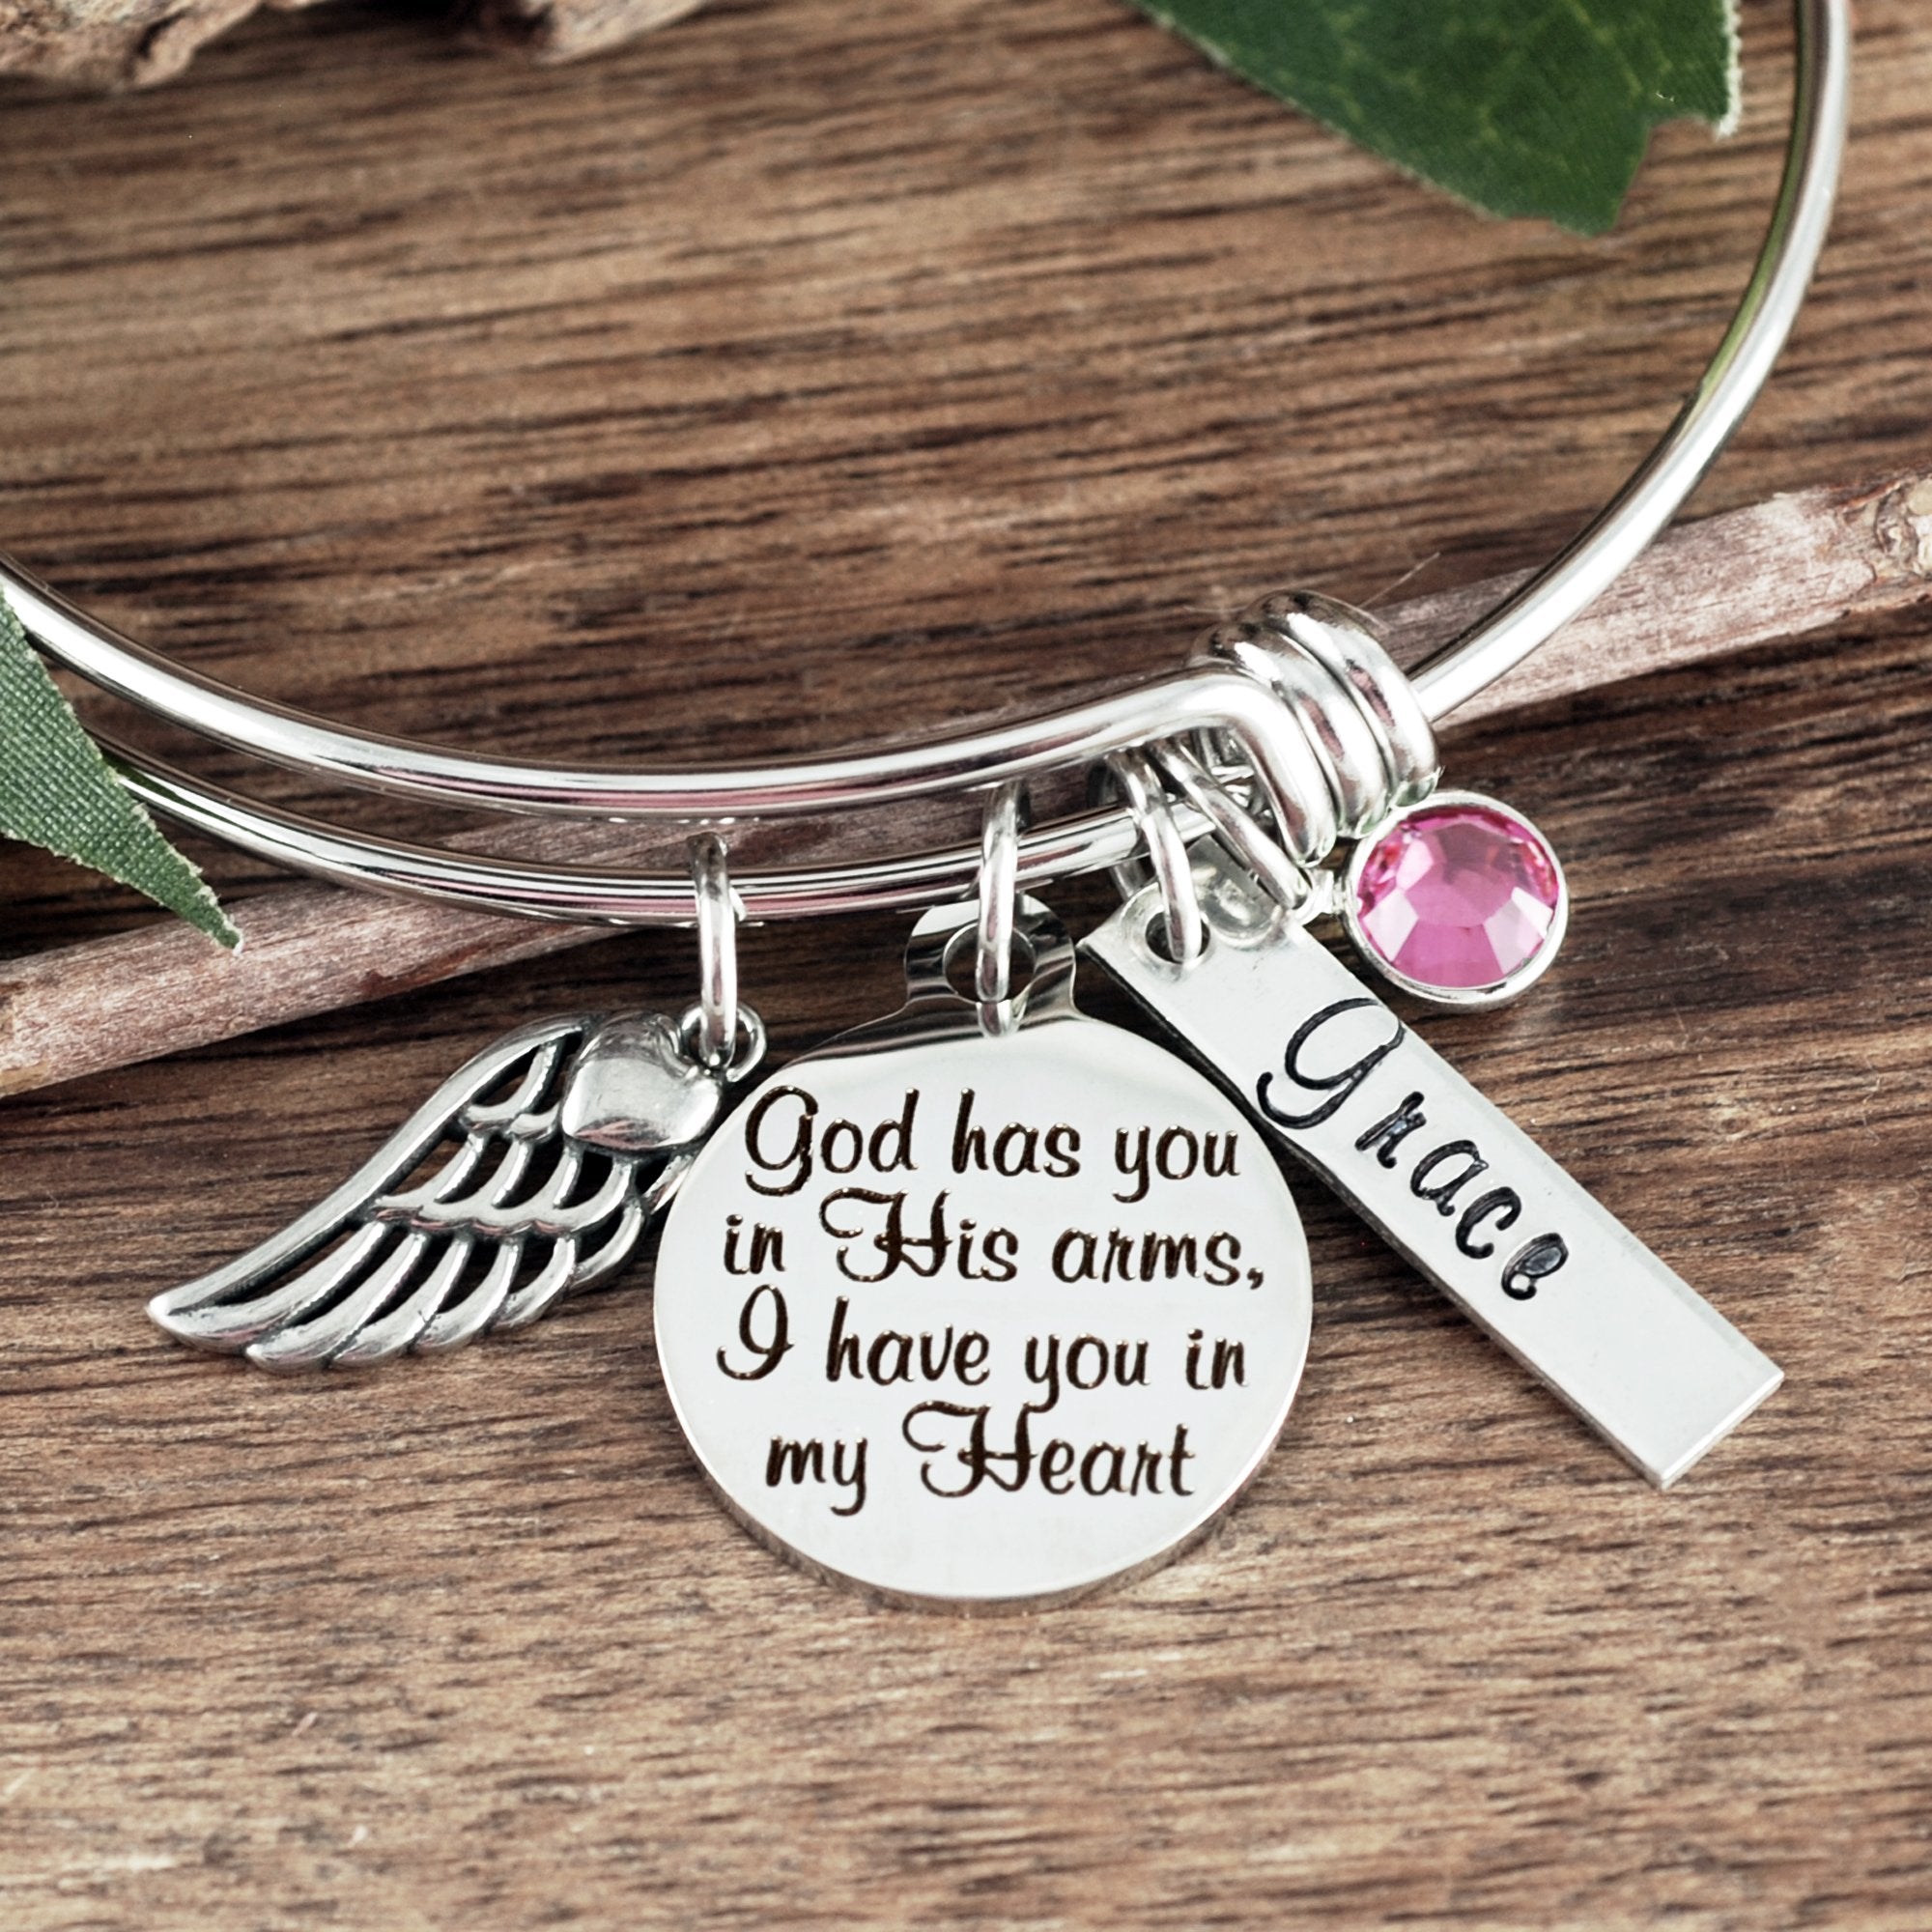 God has you in His arms I have you in my Heart Bracelet – Godfullness